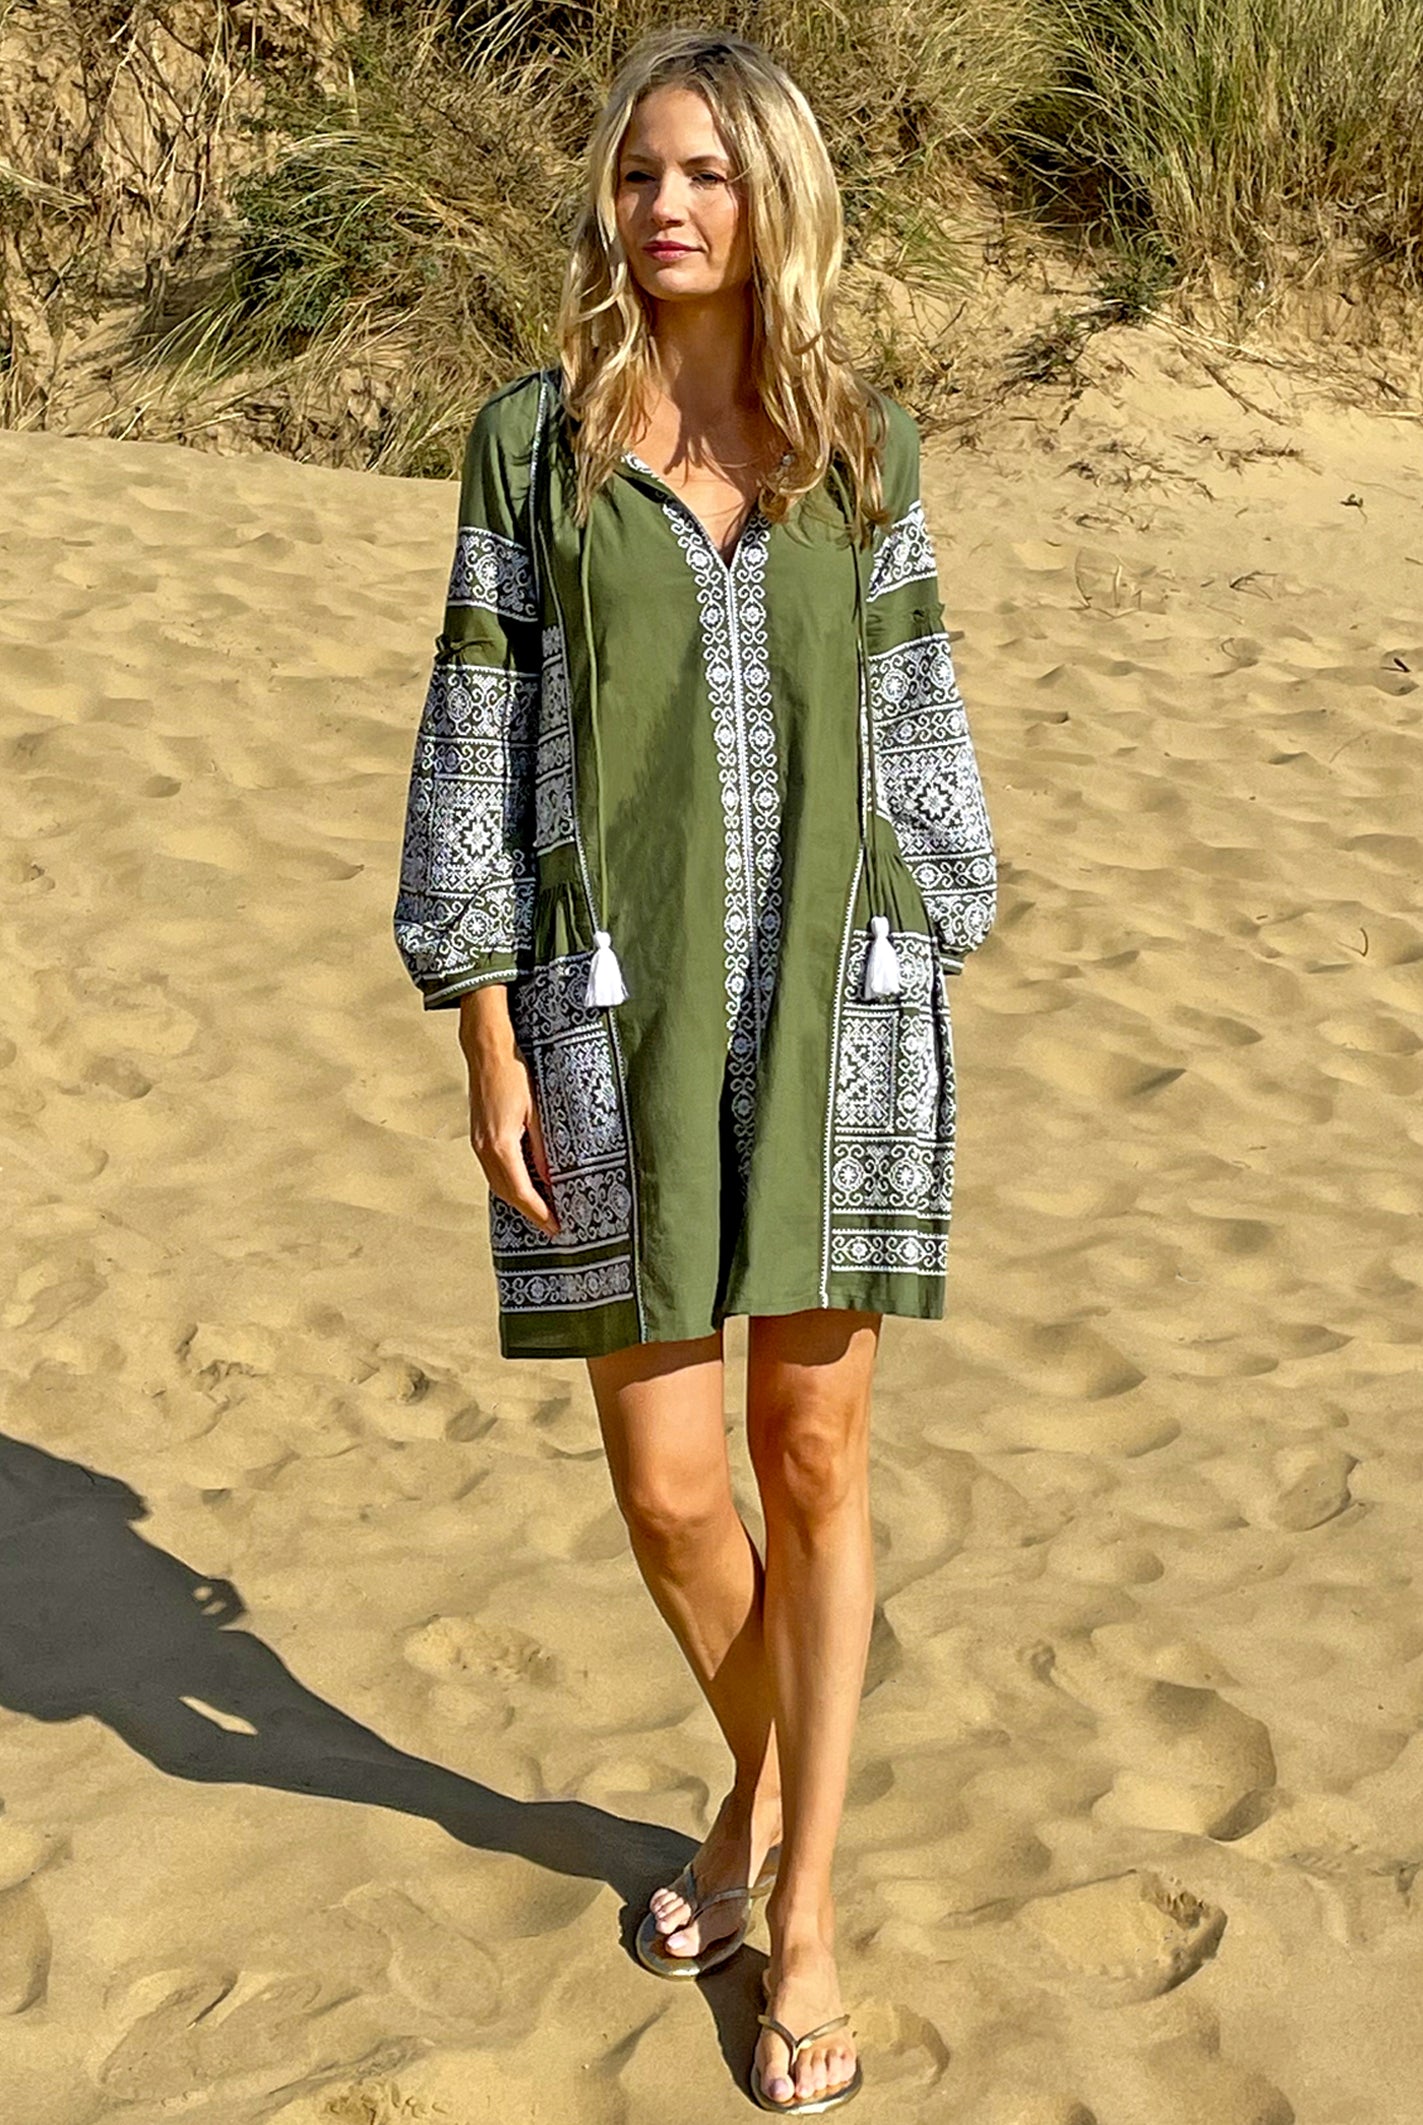 A model on a beach wearing the Rose and Rose Como embroidered dress in olive cotton.